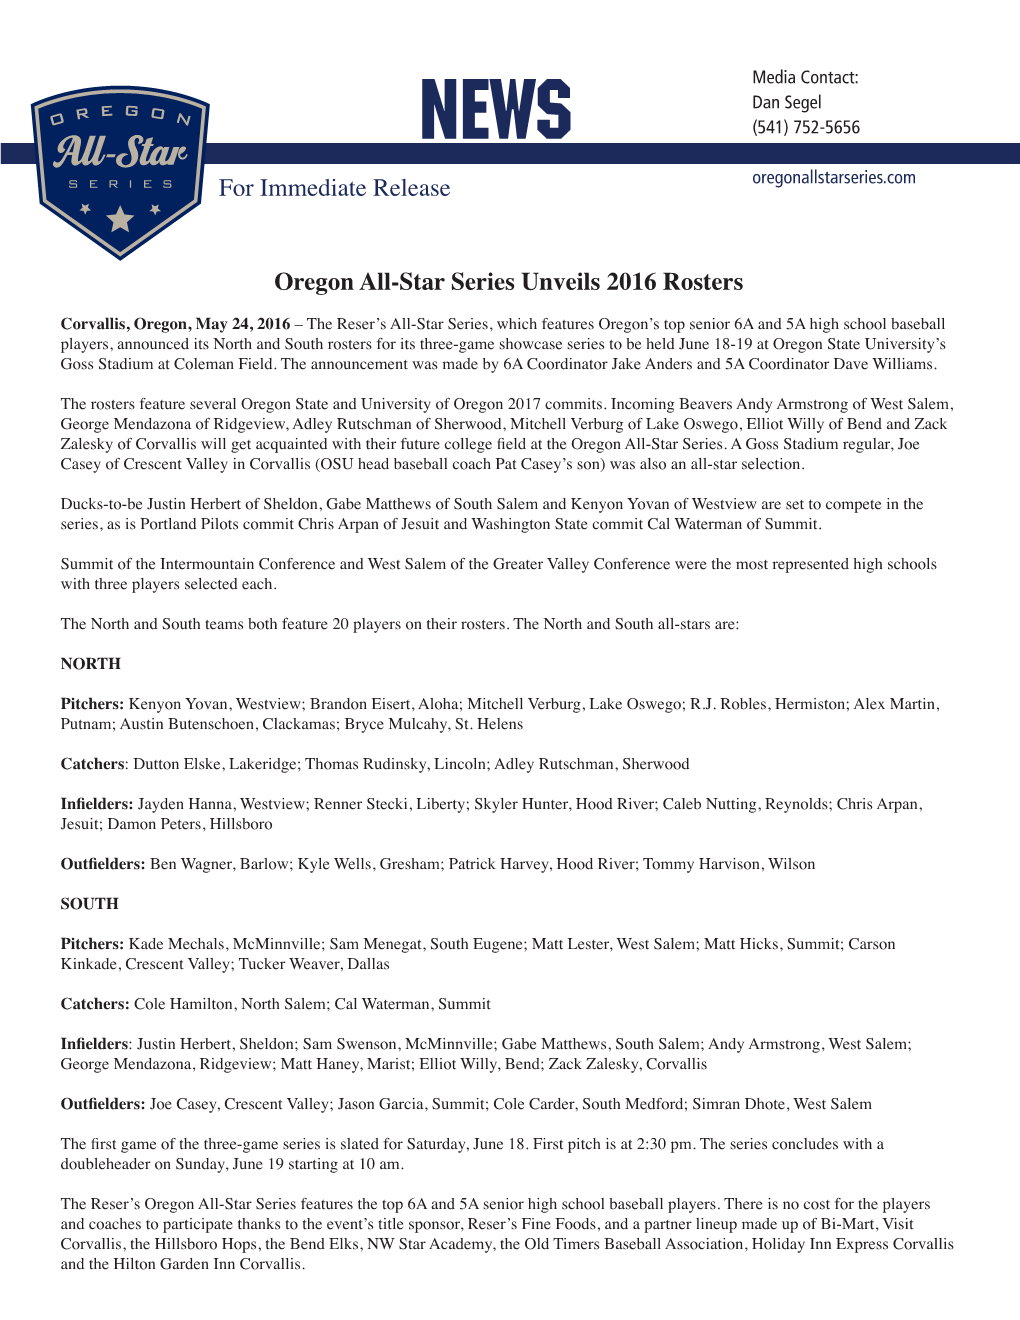 For Immediate Release Oregon All-Star Series Unveils 2016 Rosters